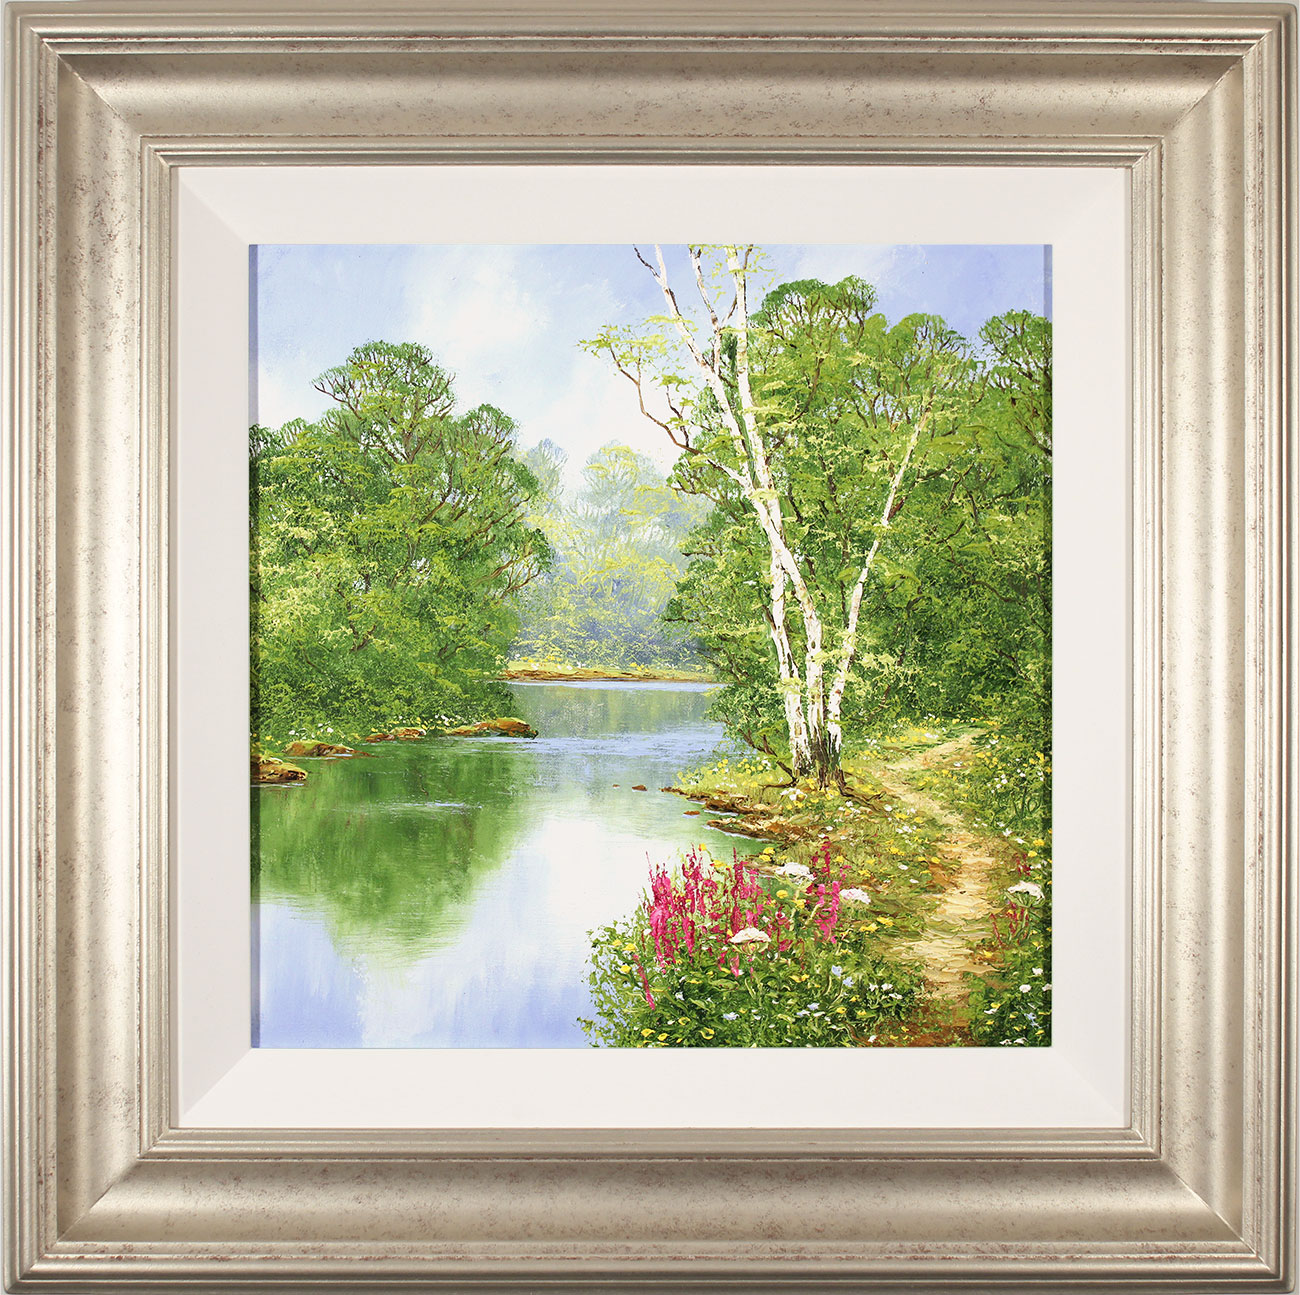 Terry Evans, Original oil painting on canvas, Summer's Song. Click to enlarge